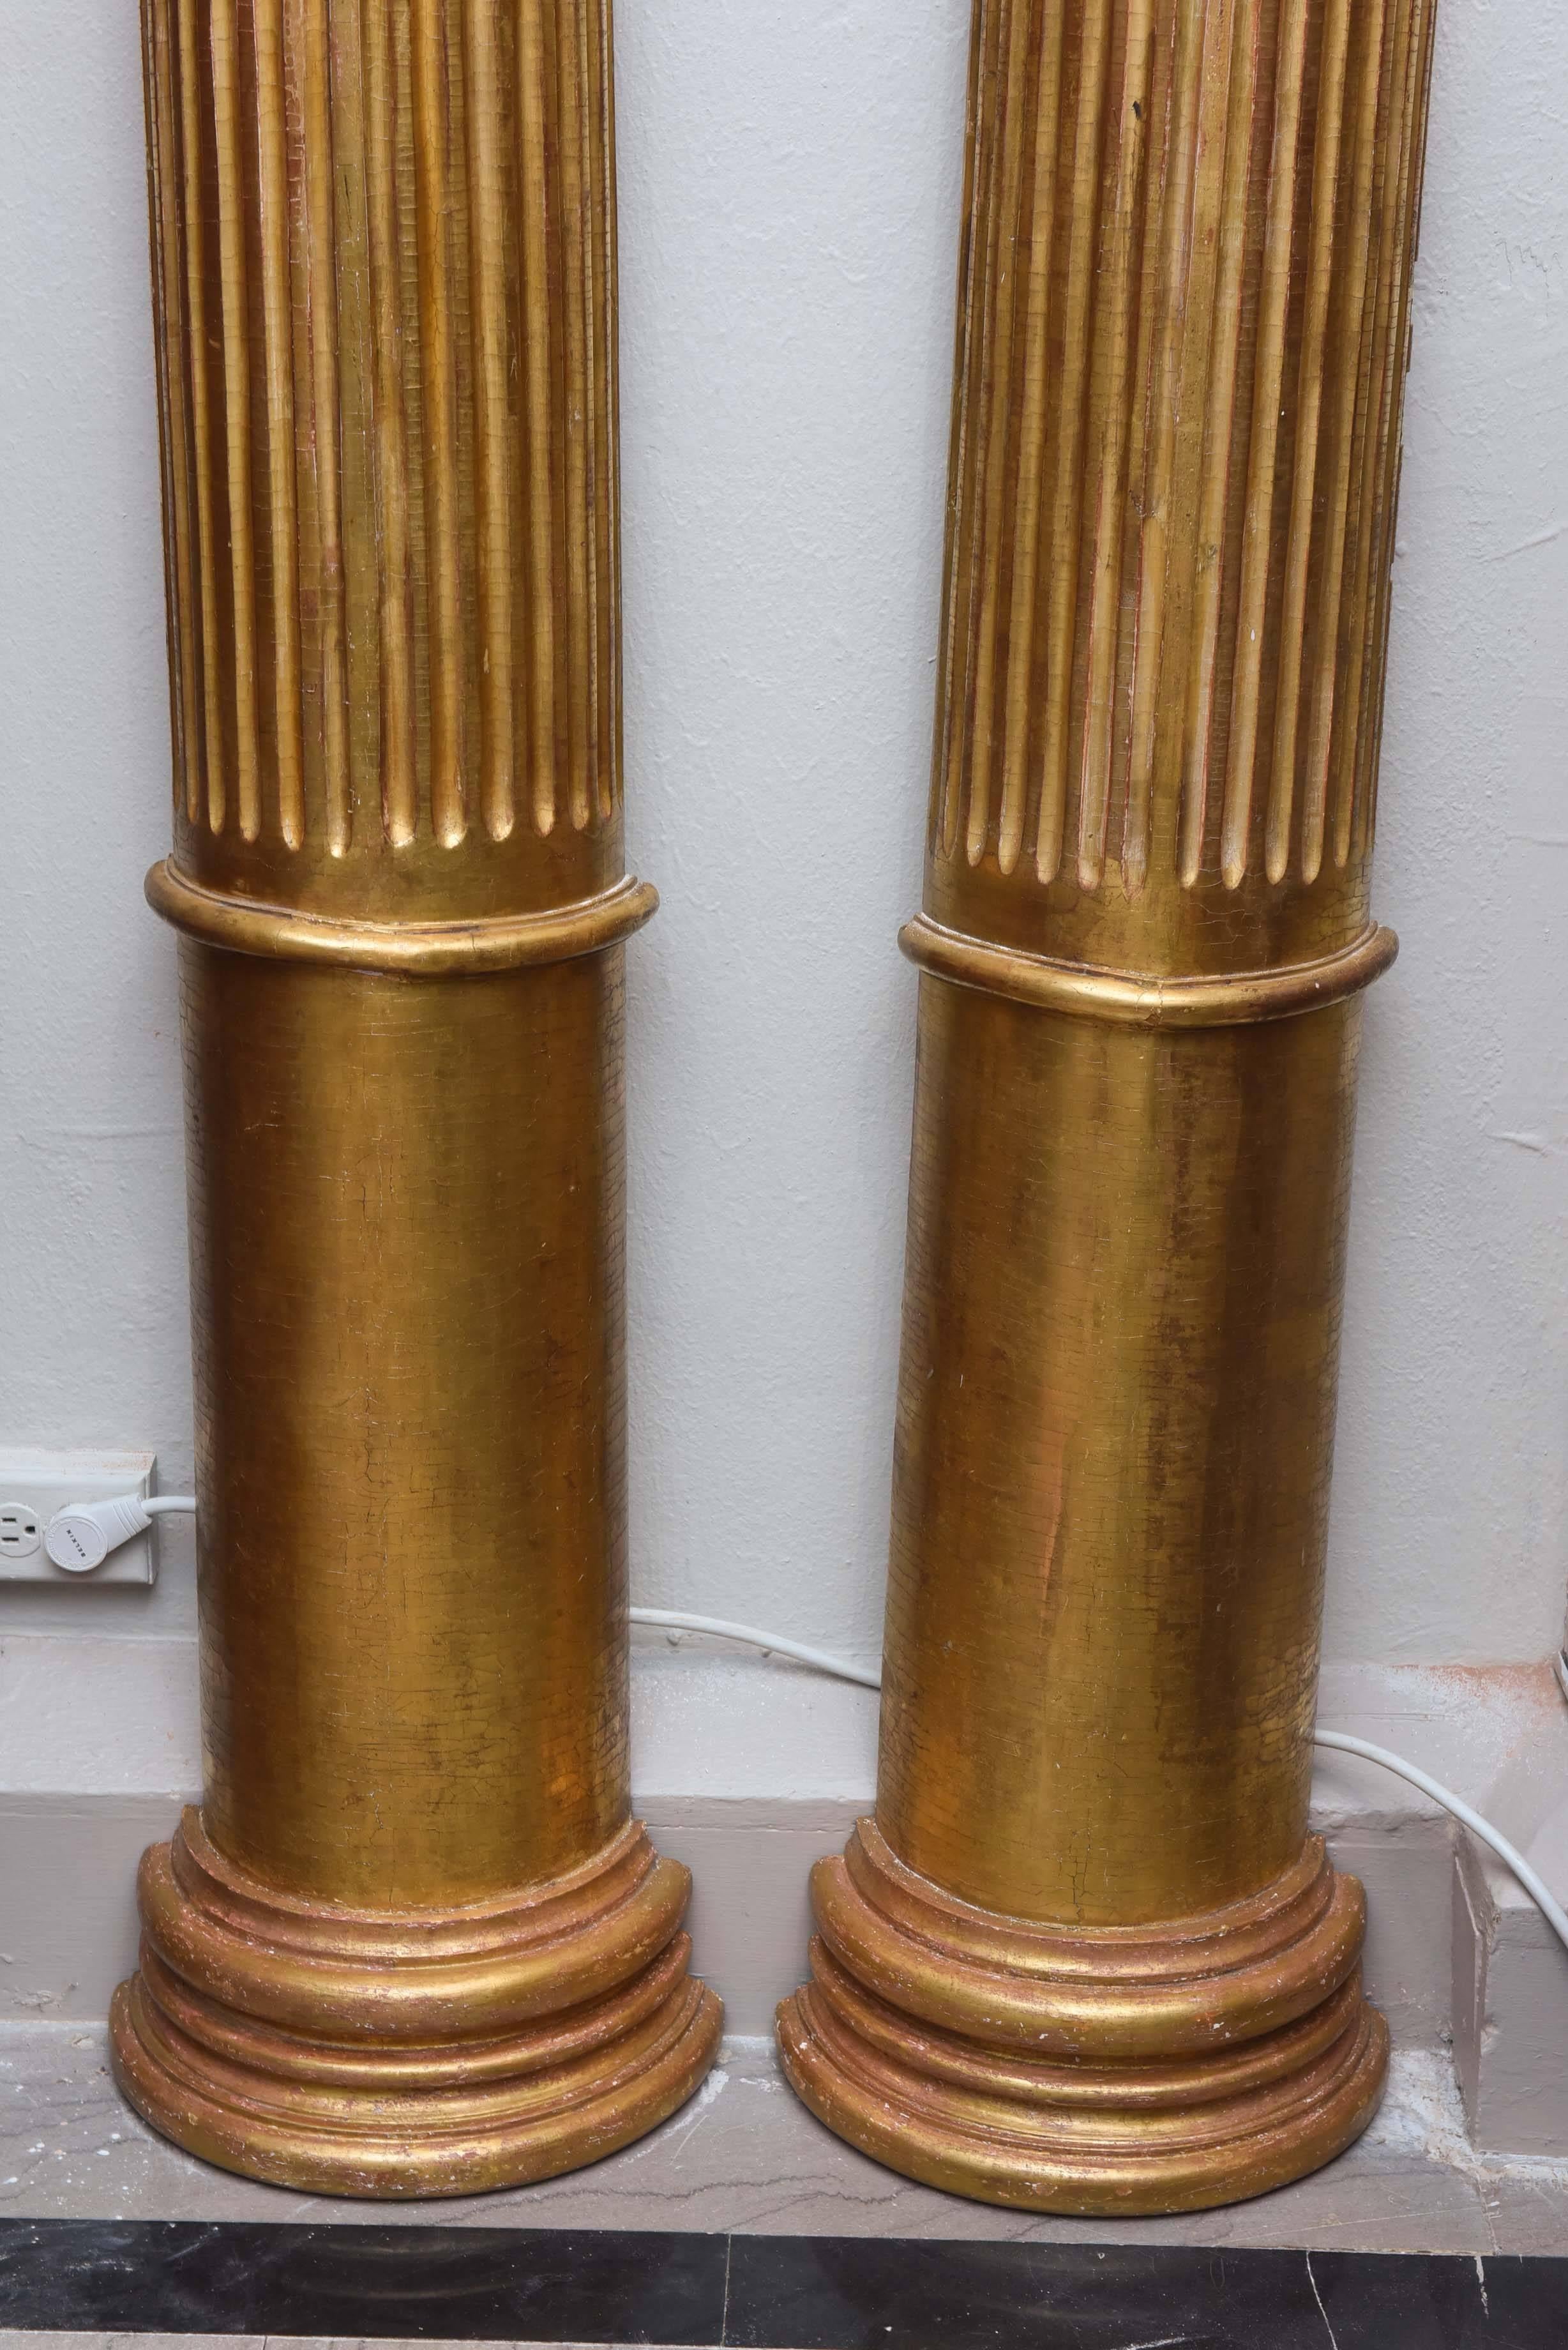 Gilt Important Pair of Monumental Russian Empire Urns with Columns